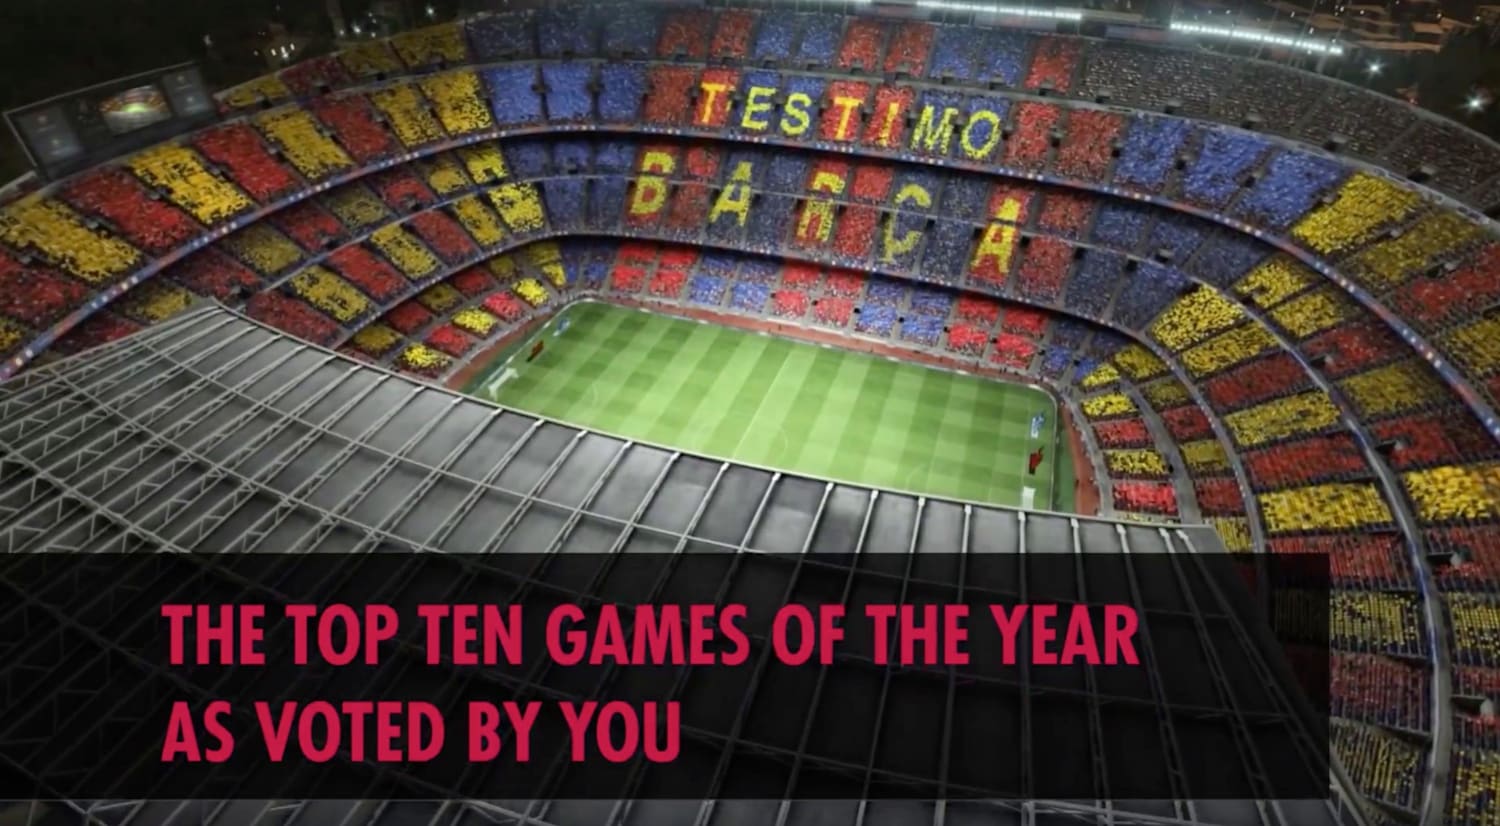 Red Bull Game of the Year 2016 results *video*